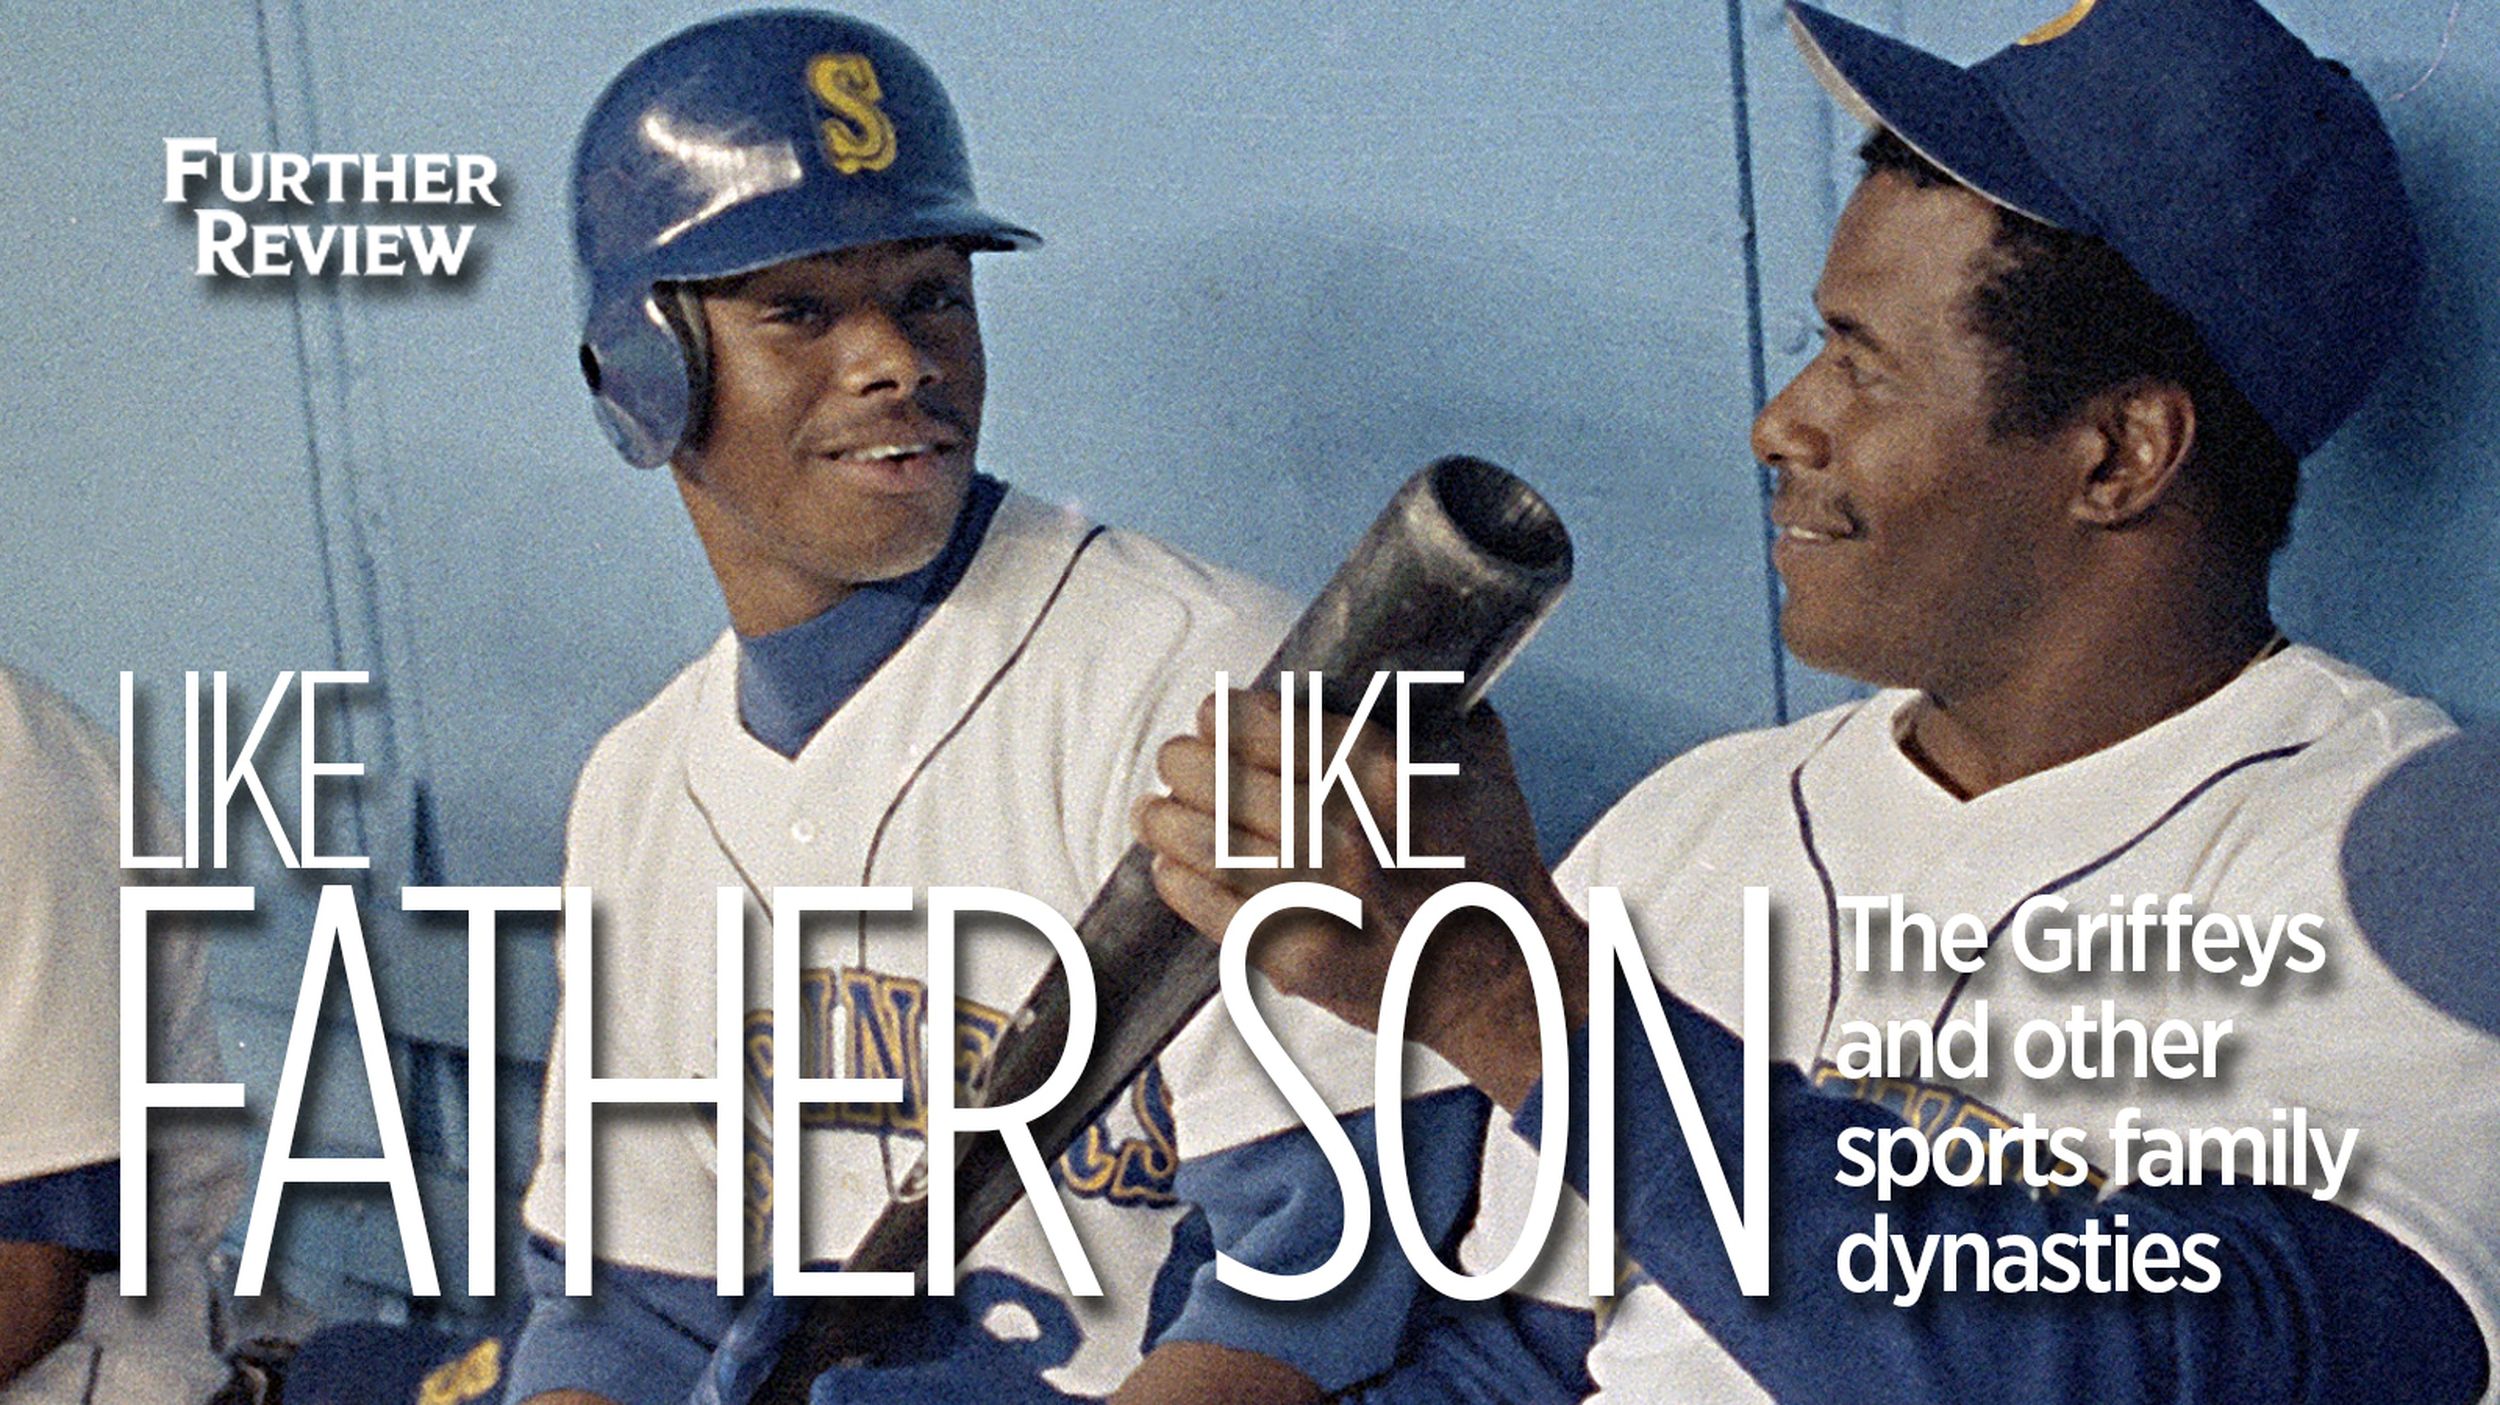 Like Father, Like Son: The Griffeys and other sports family dynasties